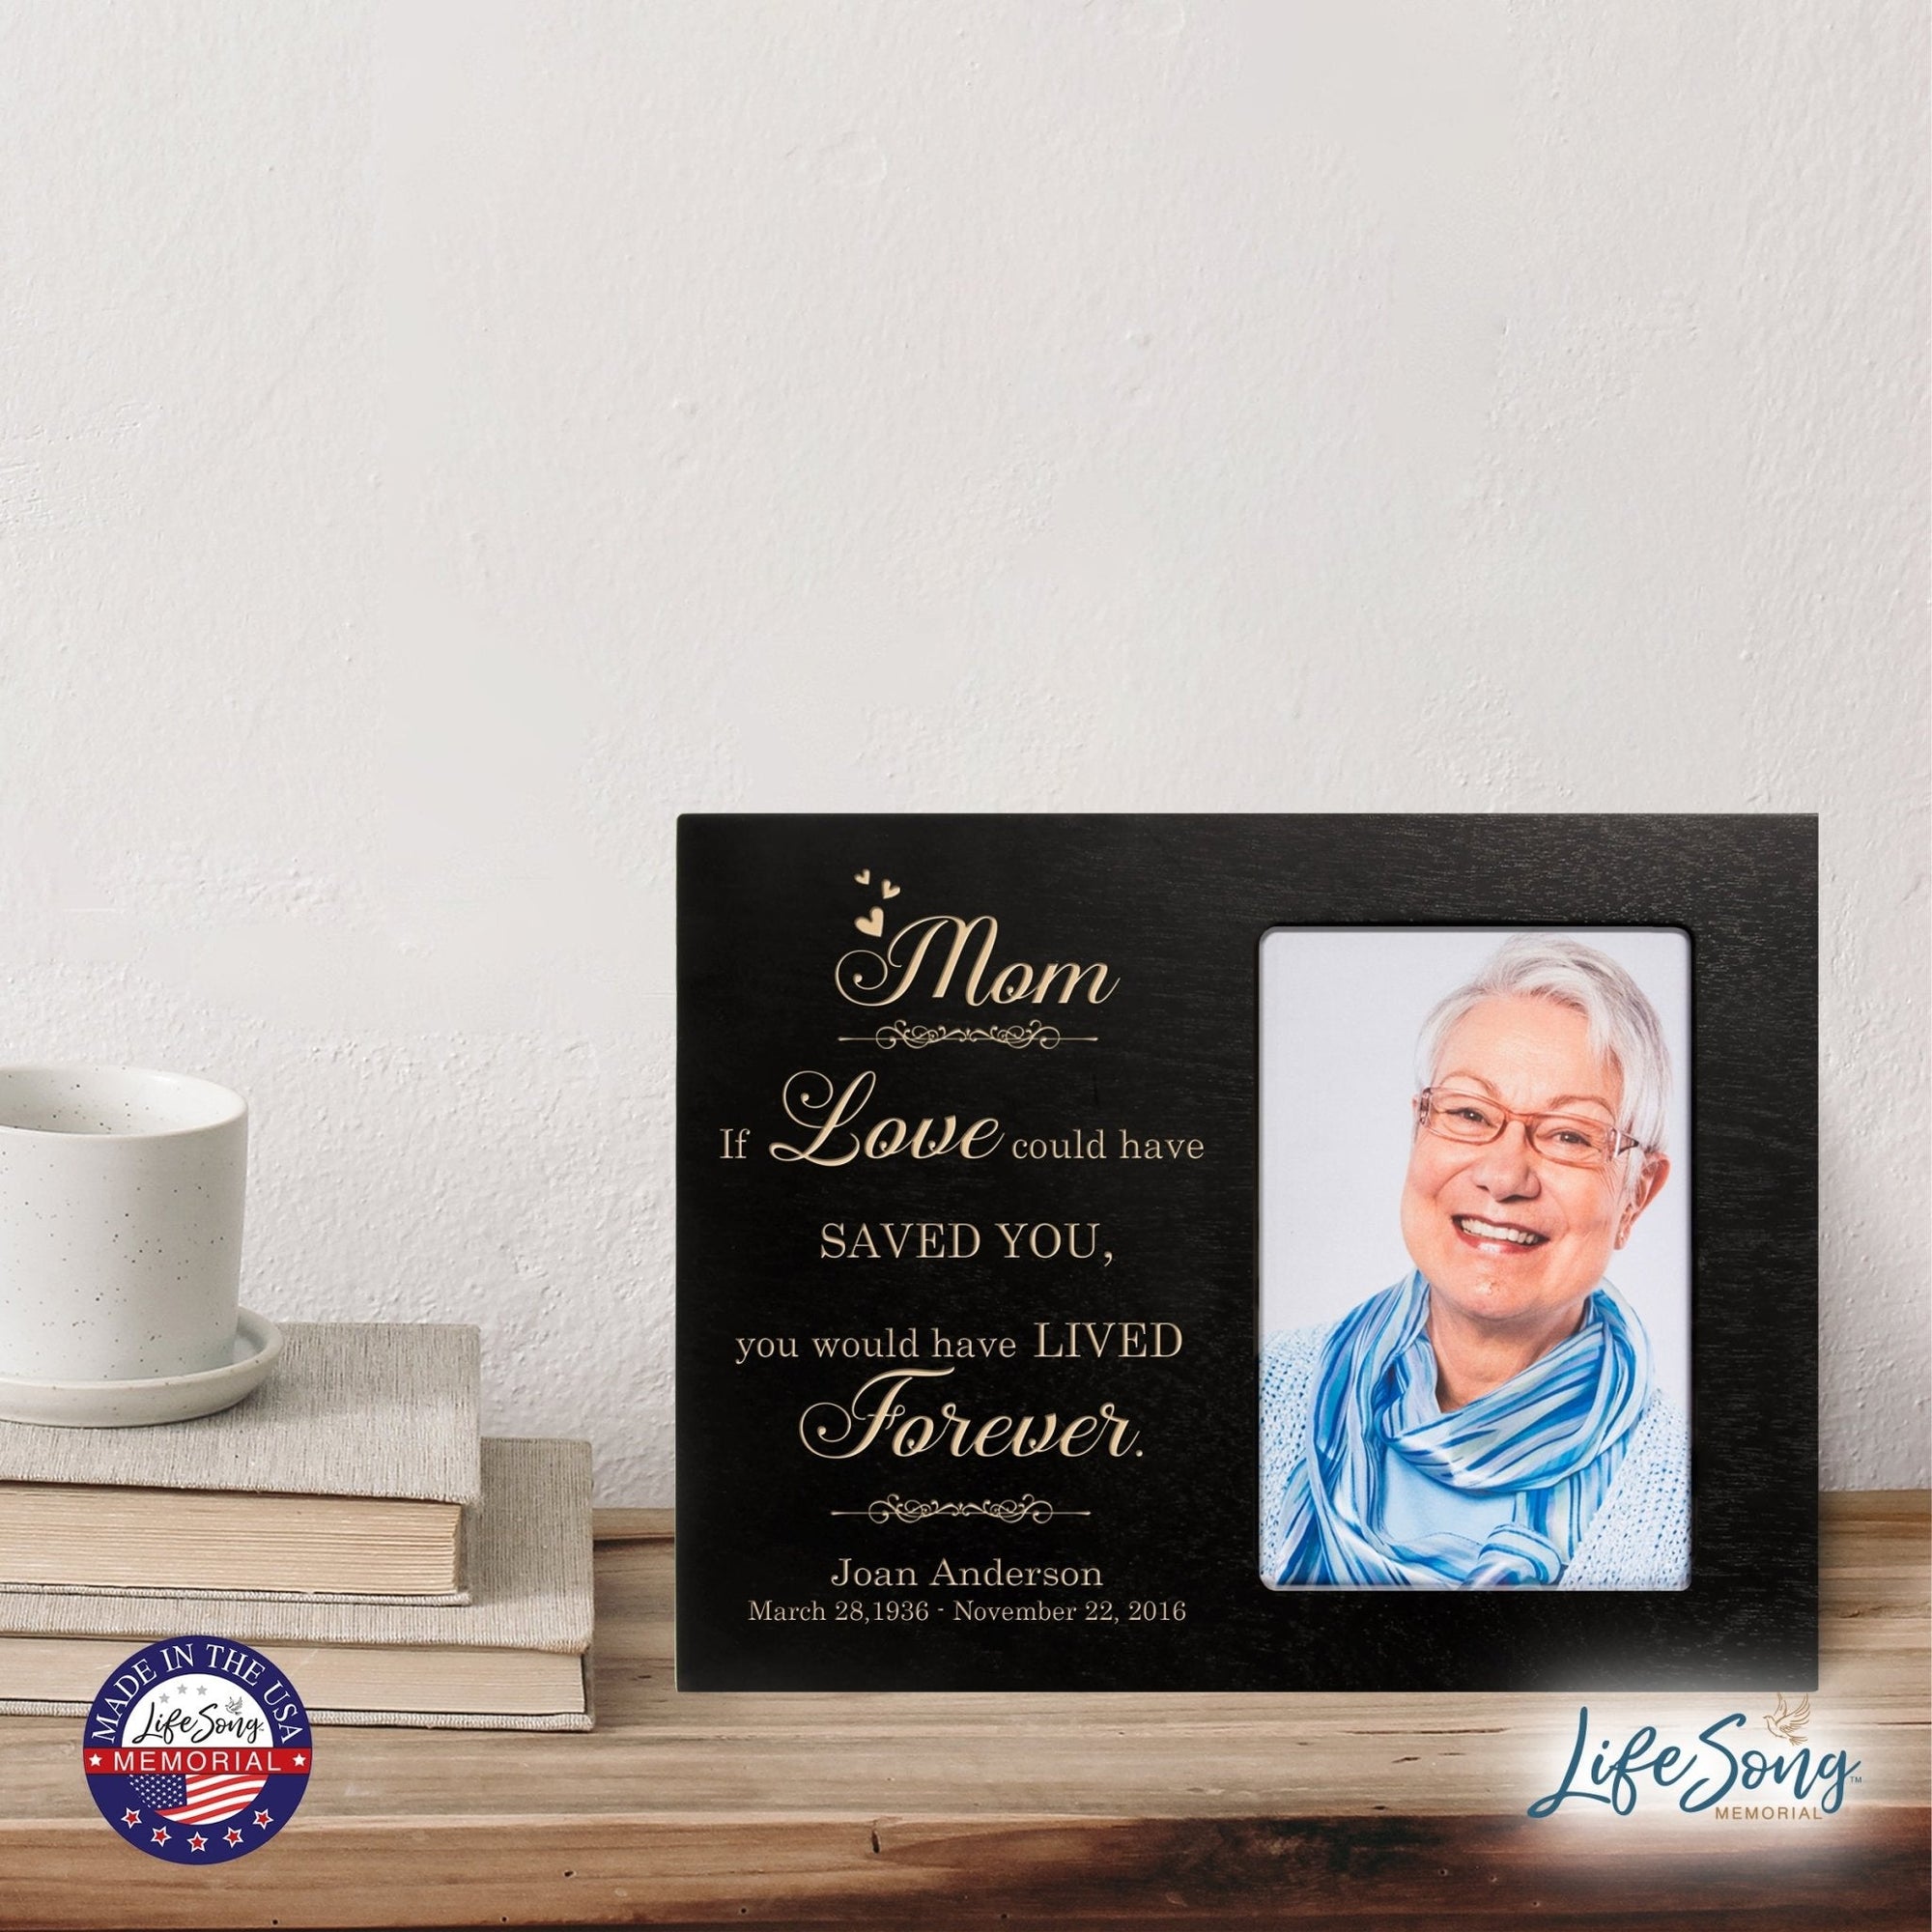 Personalized Horizontal 8x10 Wooden Memorial Picture Frame Holds 4x6 Photo - Mom, If Love Could - LifeSong Milestones